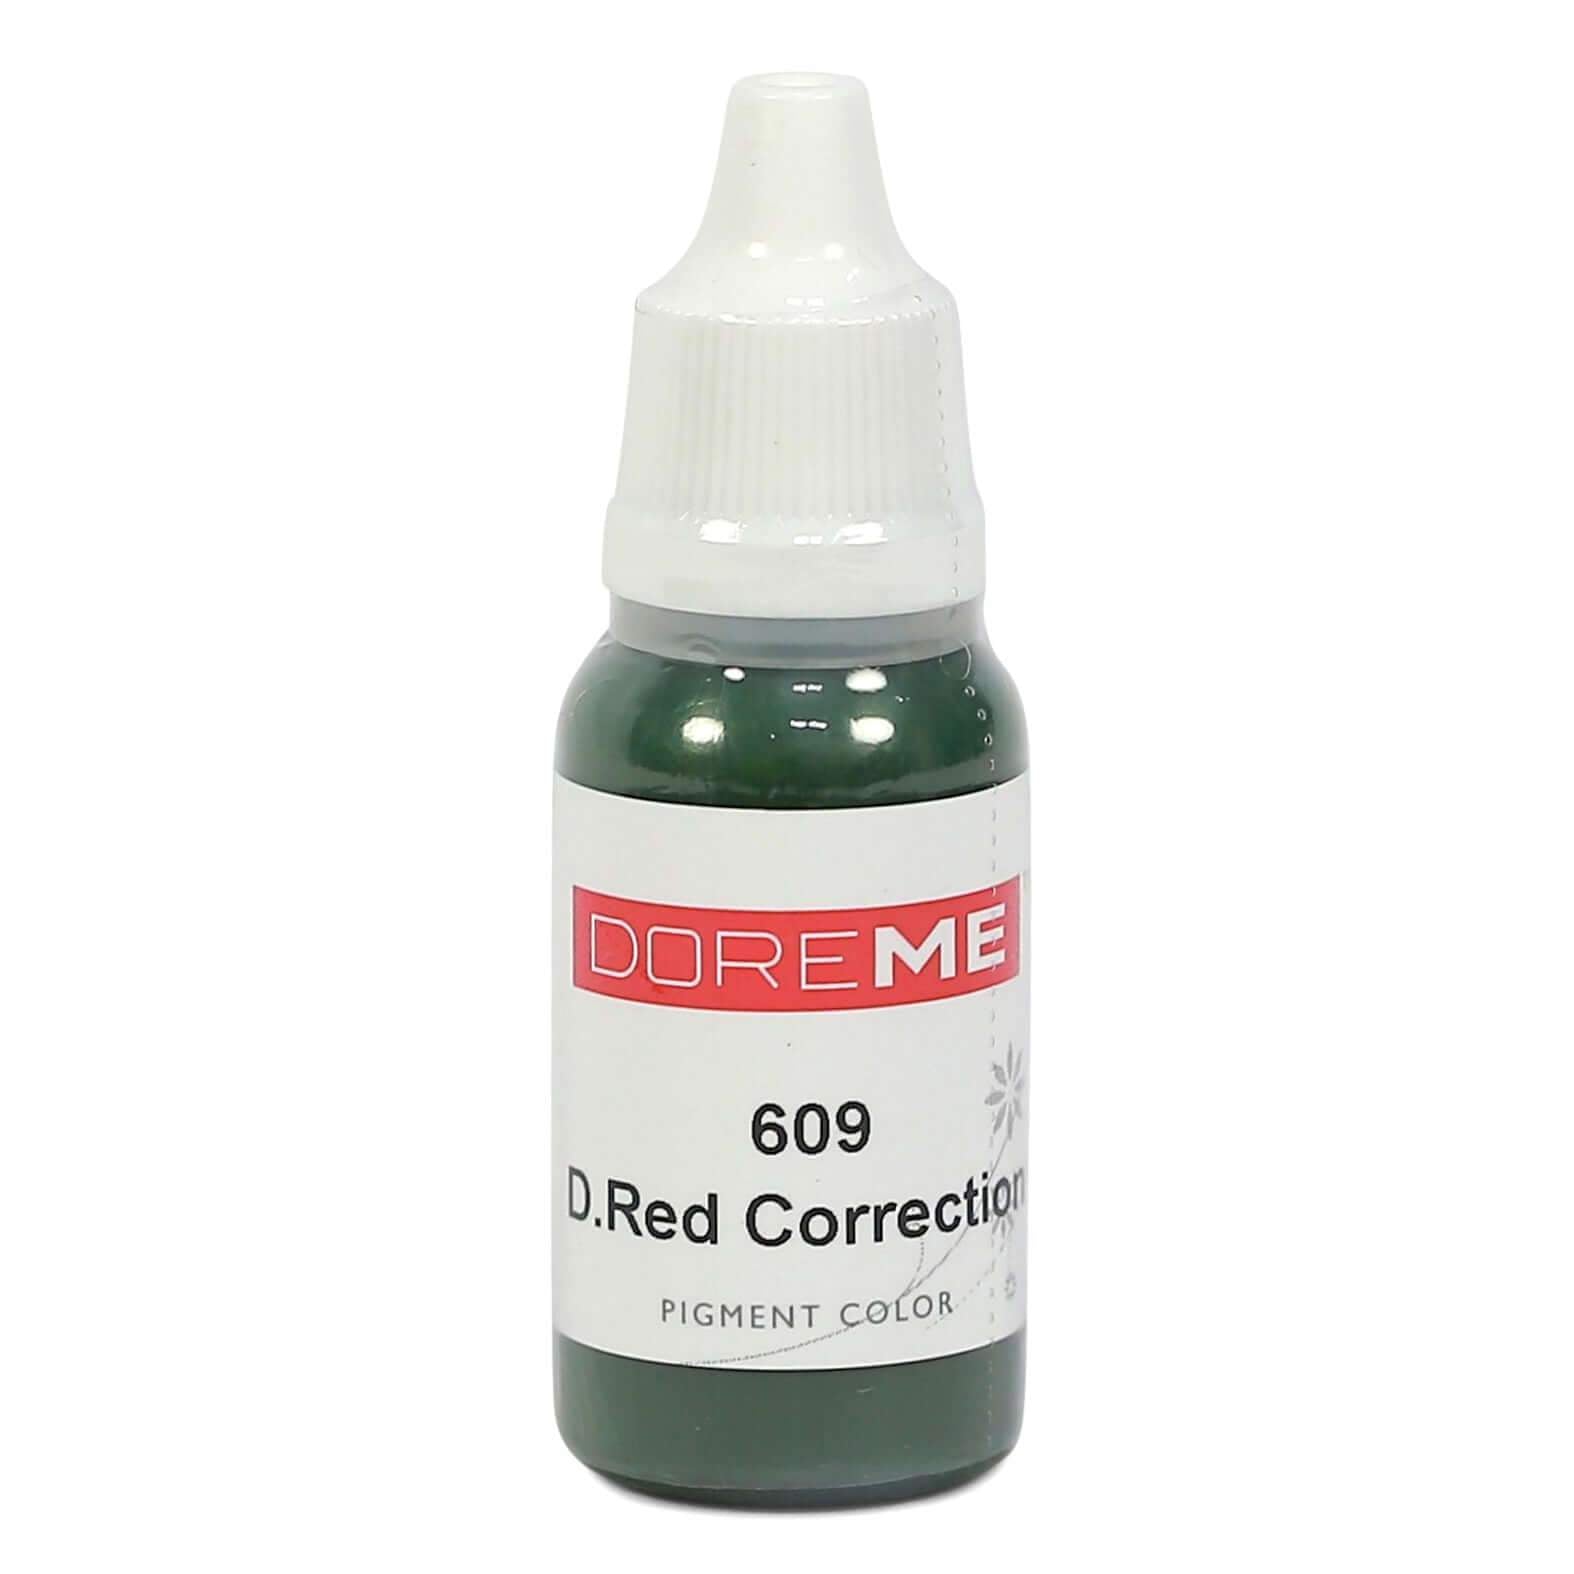 Permanent Makeup pigments Doreme Micropigmentation Correction Colours 609 D.Red Correction (c) - Beautiful Ink UK trade and wholesale supplier